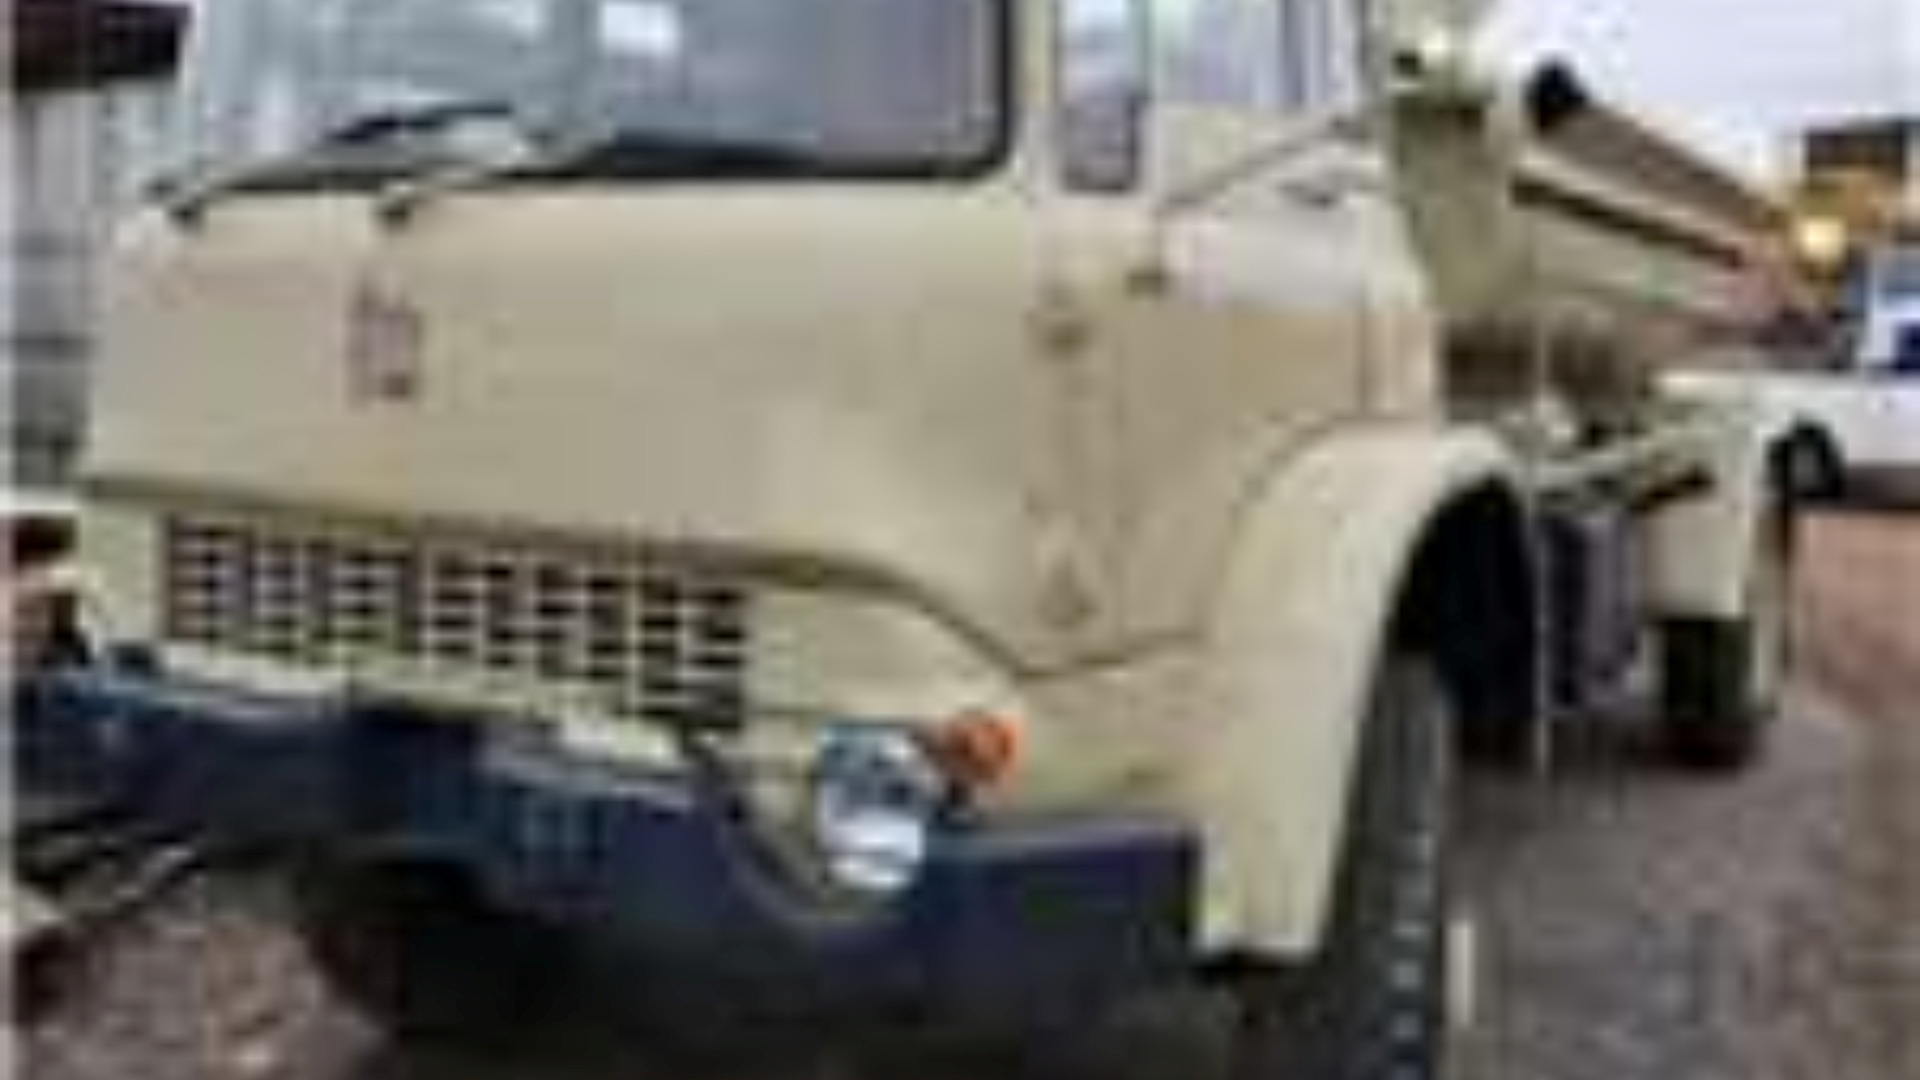 Bedford Water bowser trucks 4x4   4500 Liter Bedford 1975 for sale by Power Truck And Plant Sales | Truck & Trailer Marketplace